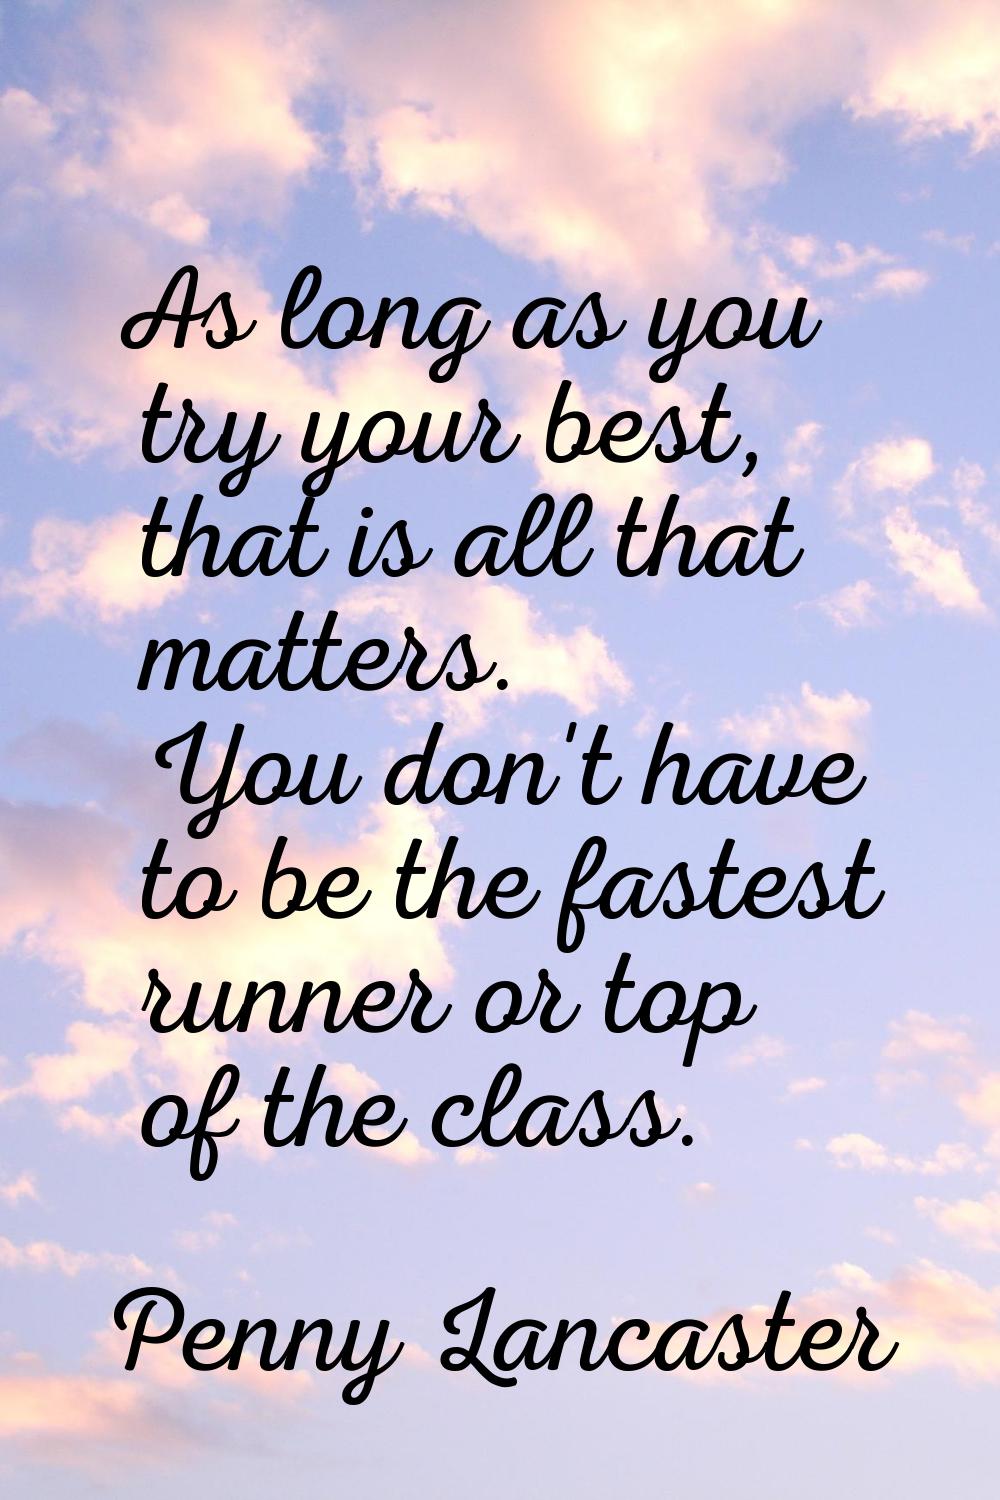 As long as you try your best, that is all that matters. You don't have to be the fastest runner or 